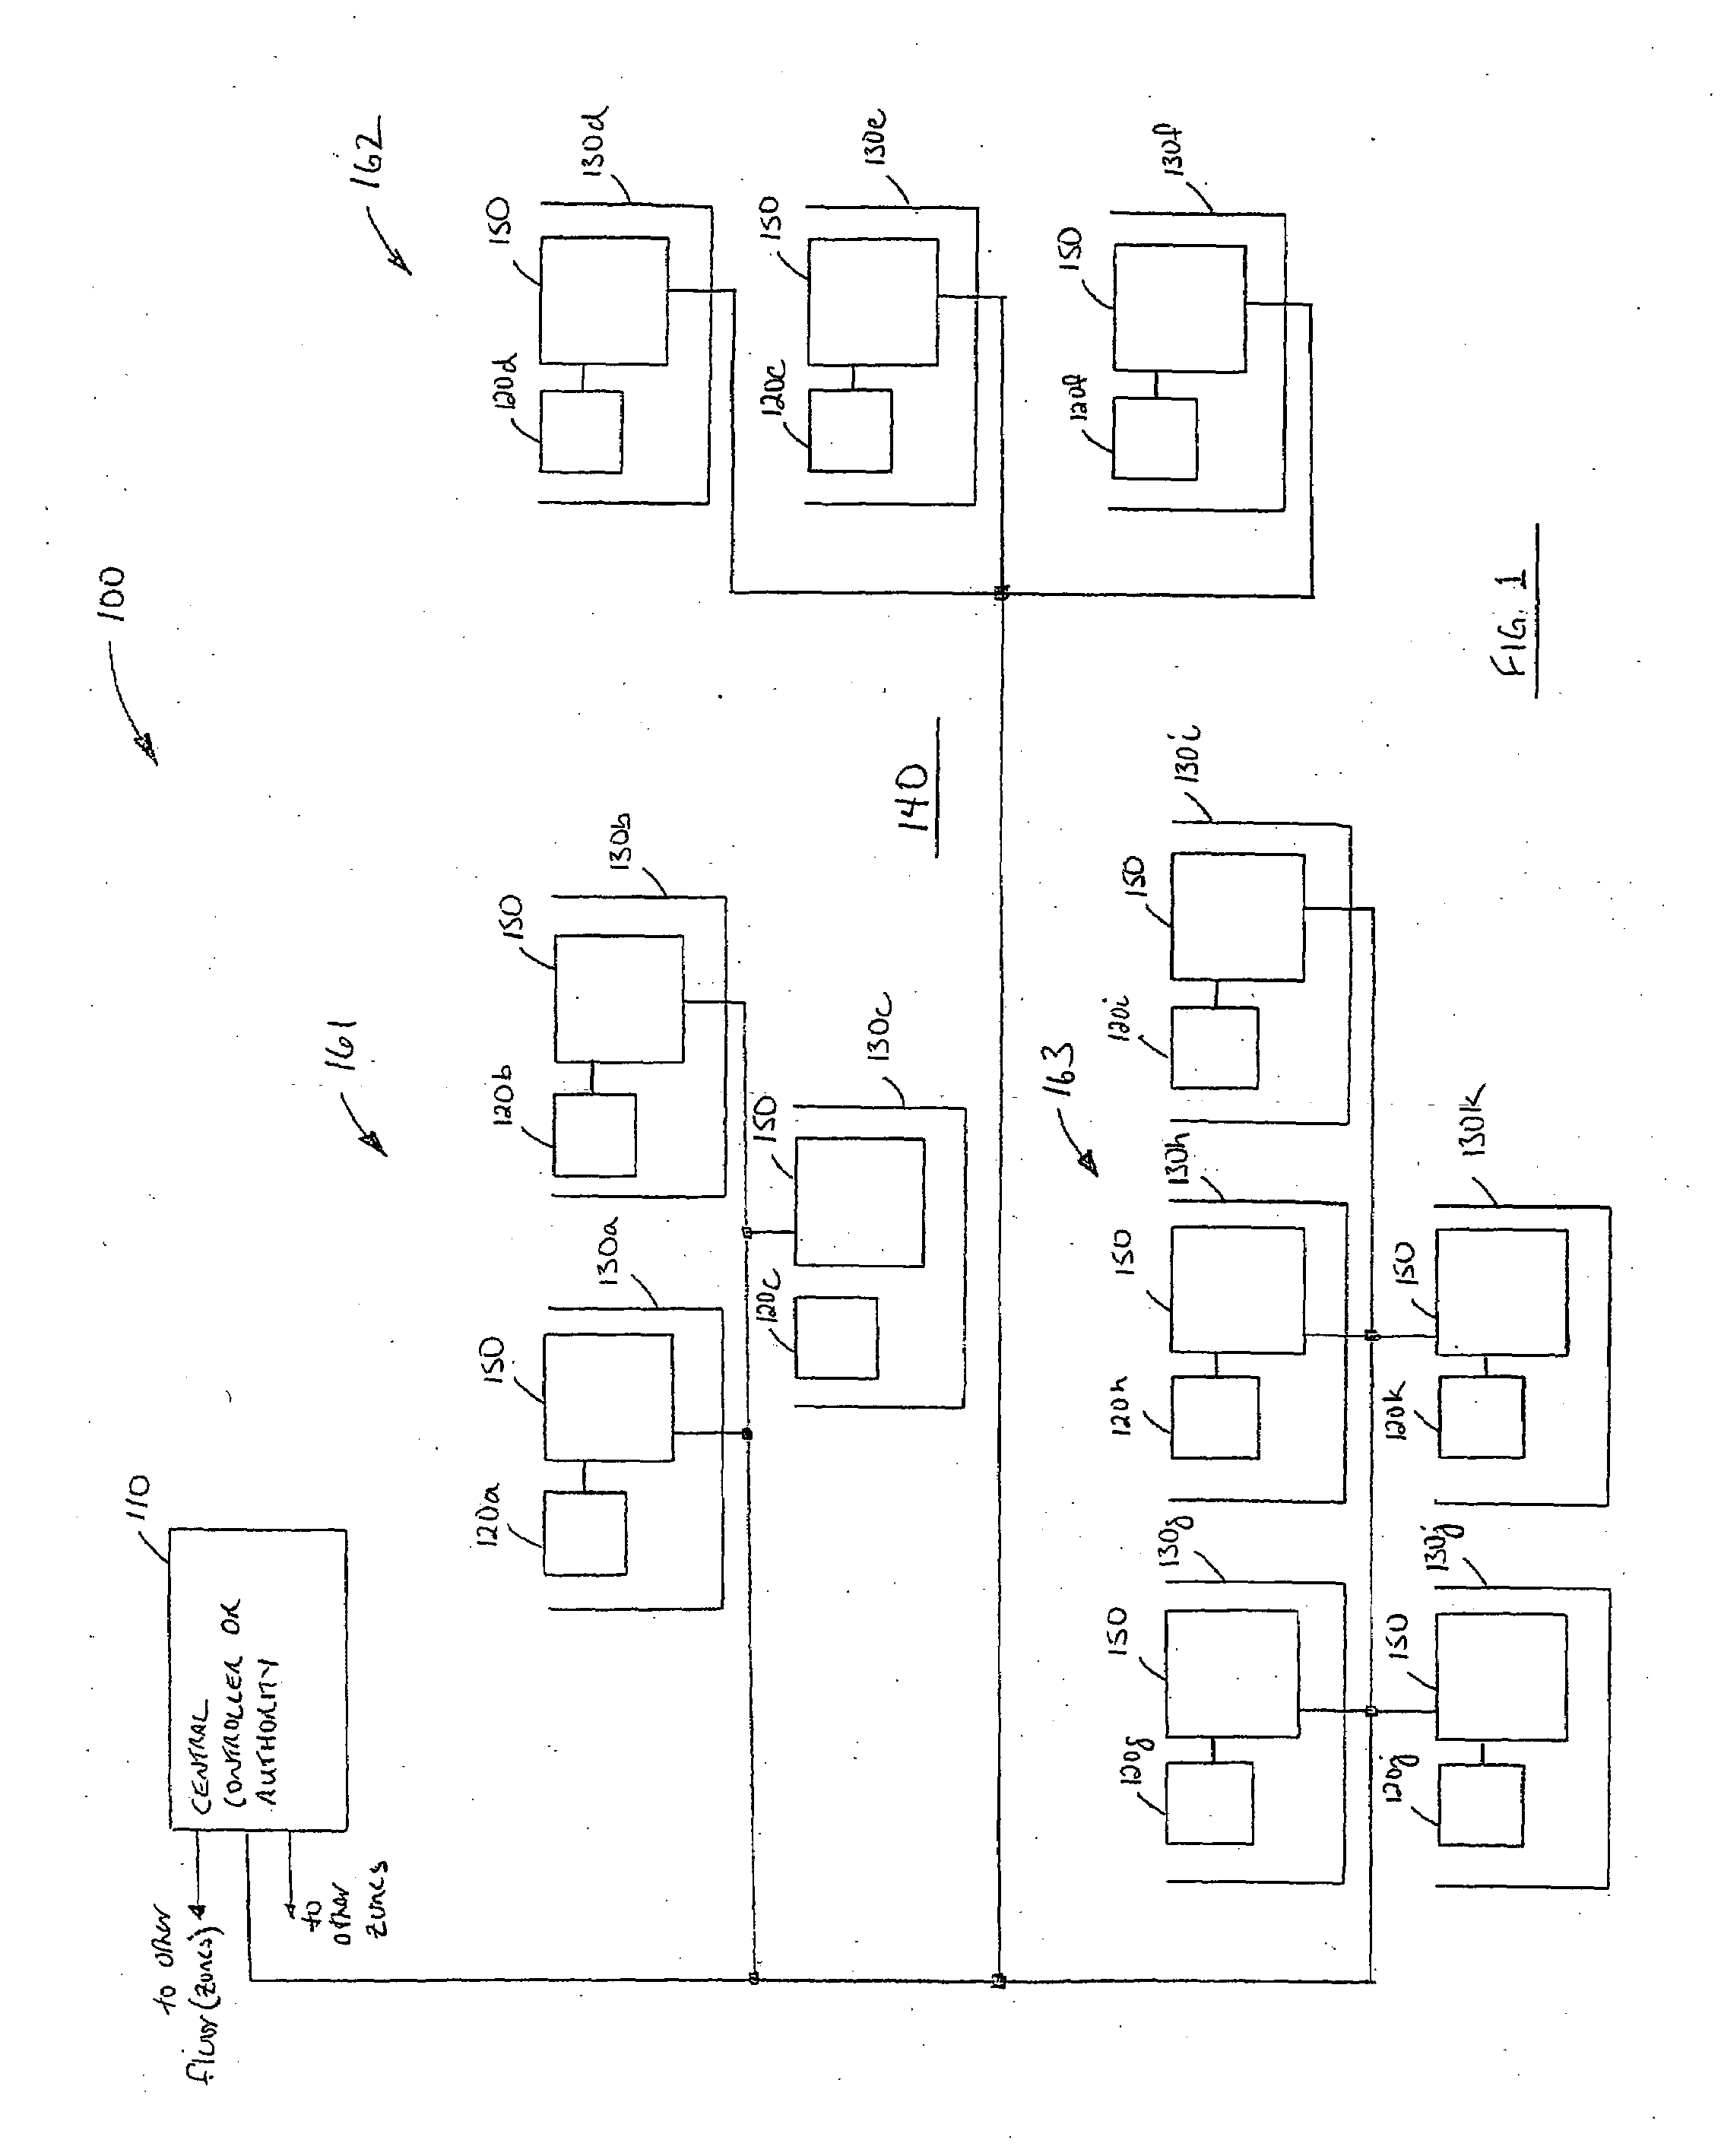 System and method for a sound masking system for networked workstations or offices